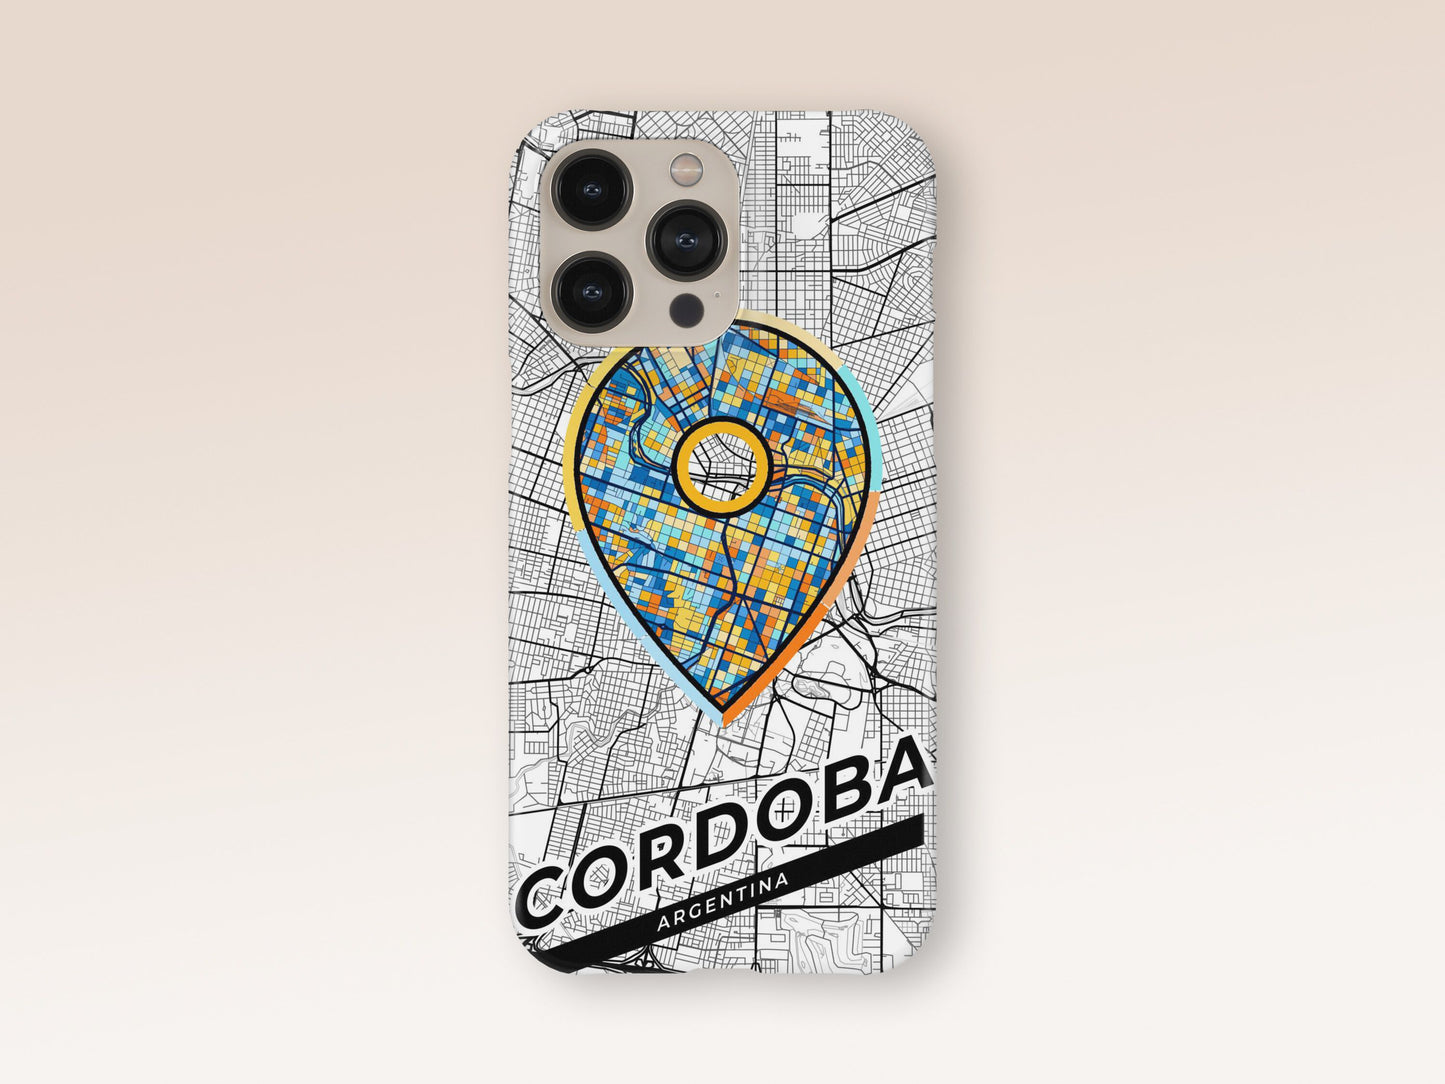 Cordoba Argentina slim phone case with colorful icon. Birthday, wedding or housewarming gift. Couple match cases. 1